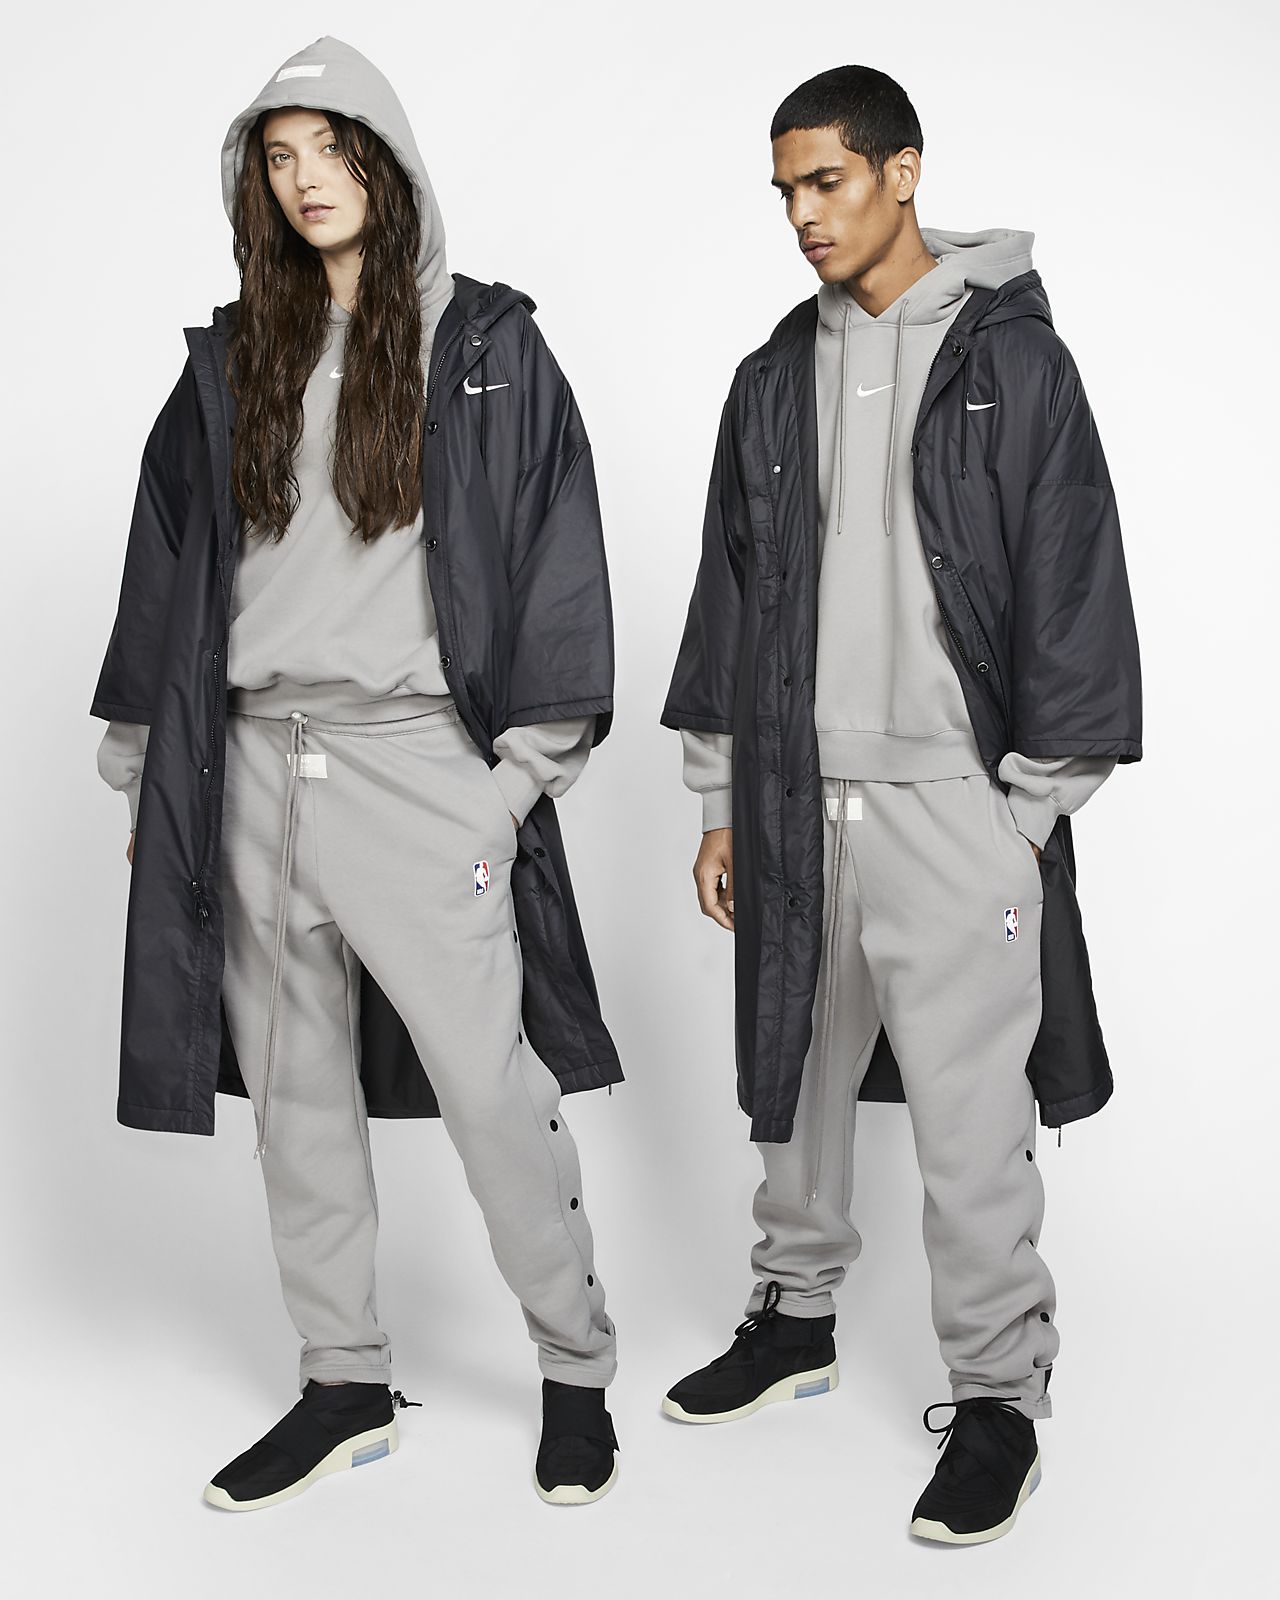 nike x fear of god collection